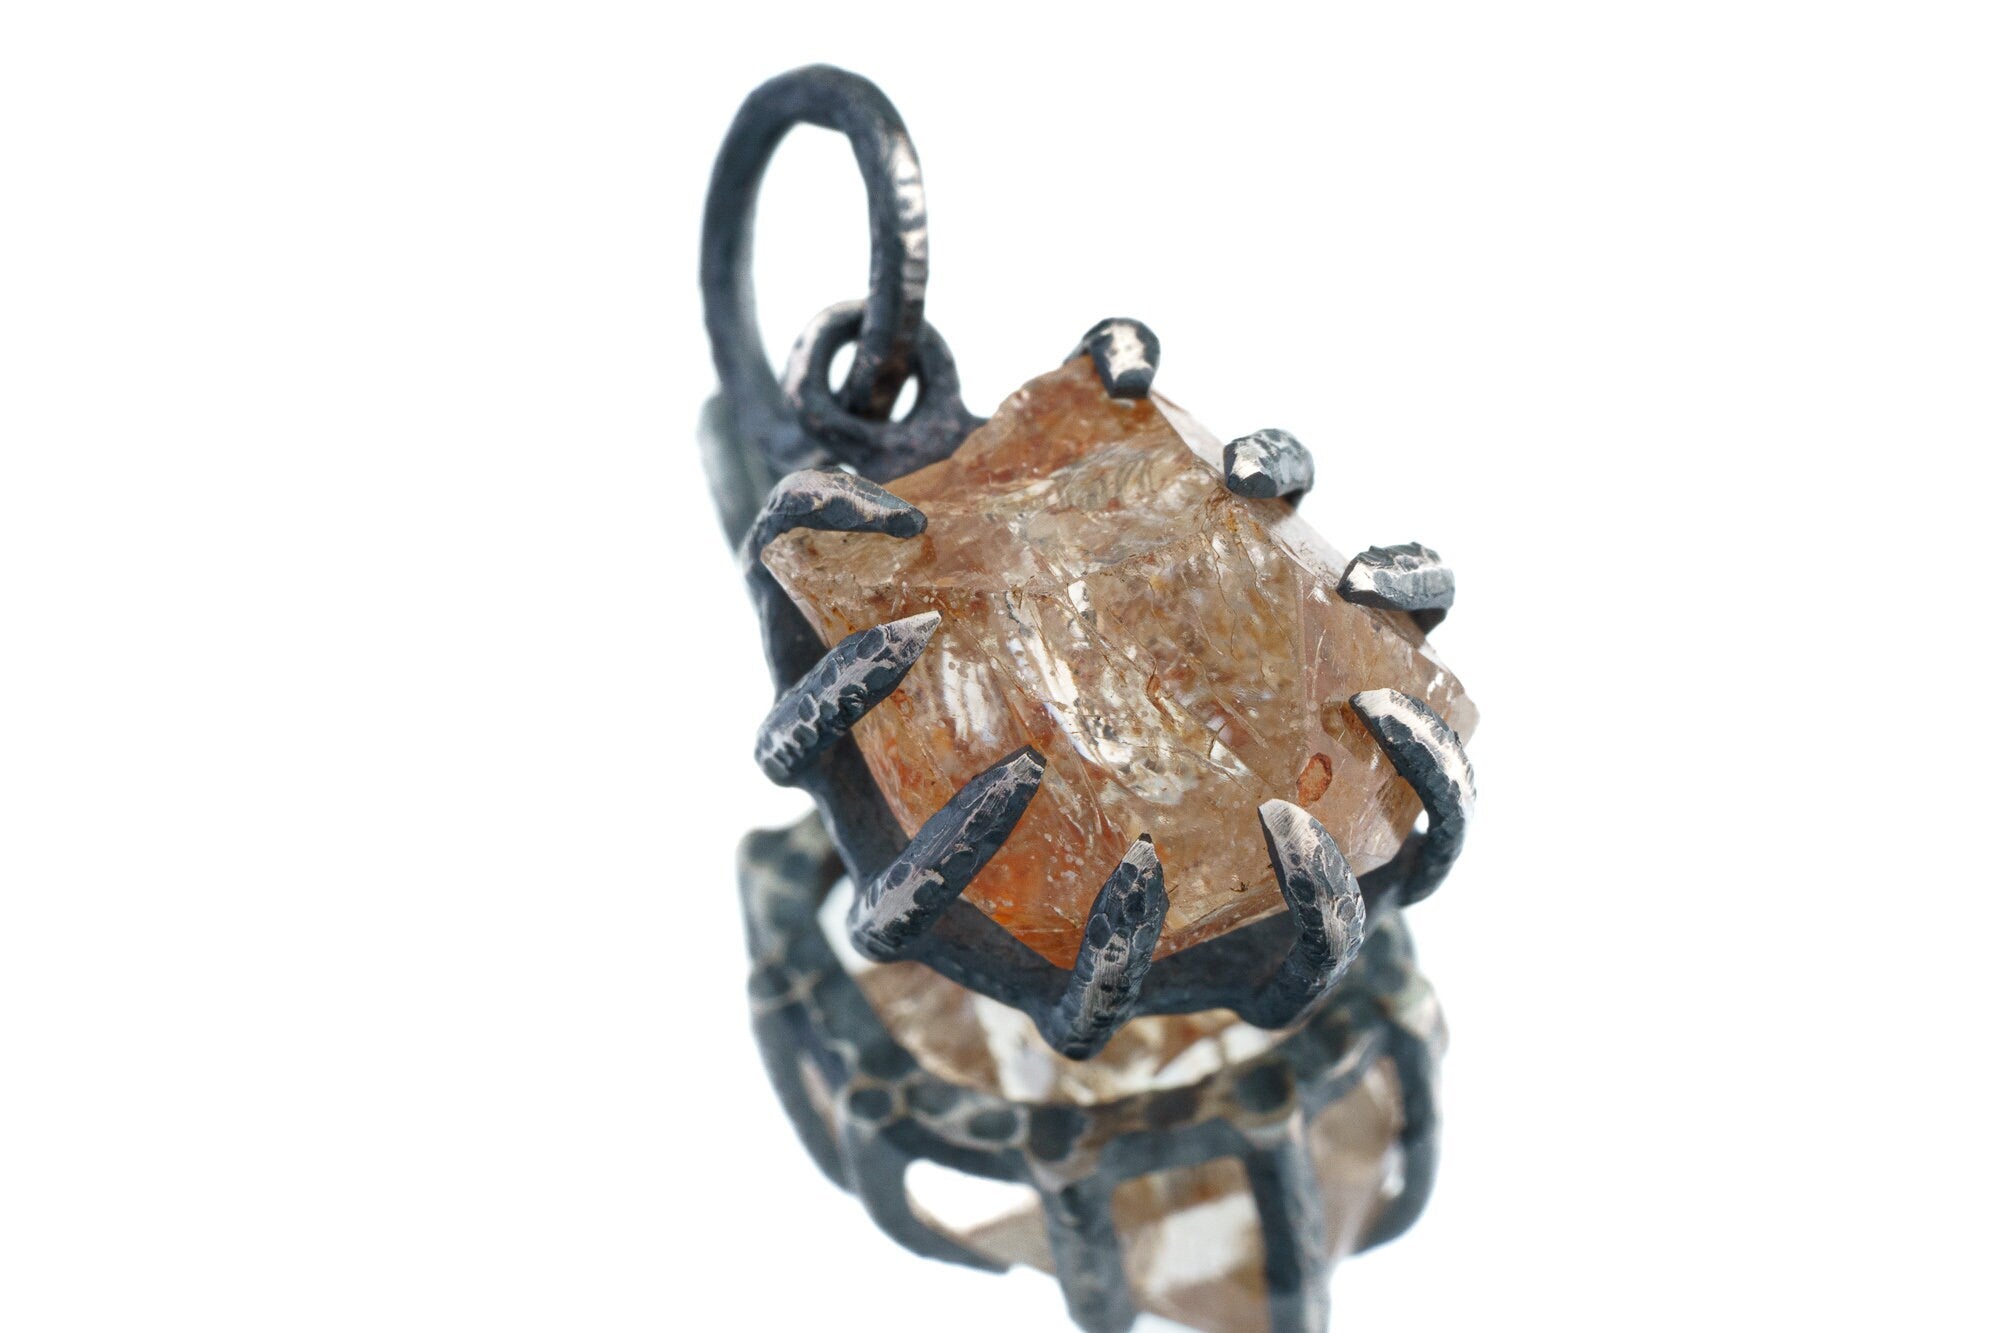 Raw Gem Australian Golden Topaz - Oxidised Sterling Silver - Strong Claw Wire Setting - Hammer Textured - Pendant Crystal Necklace